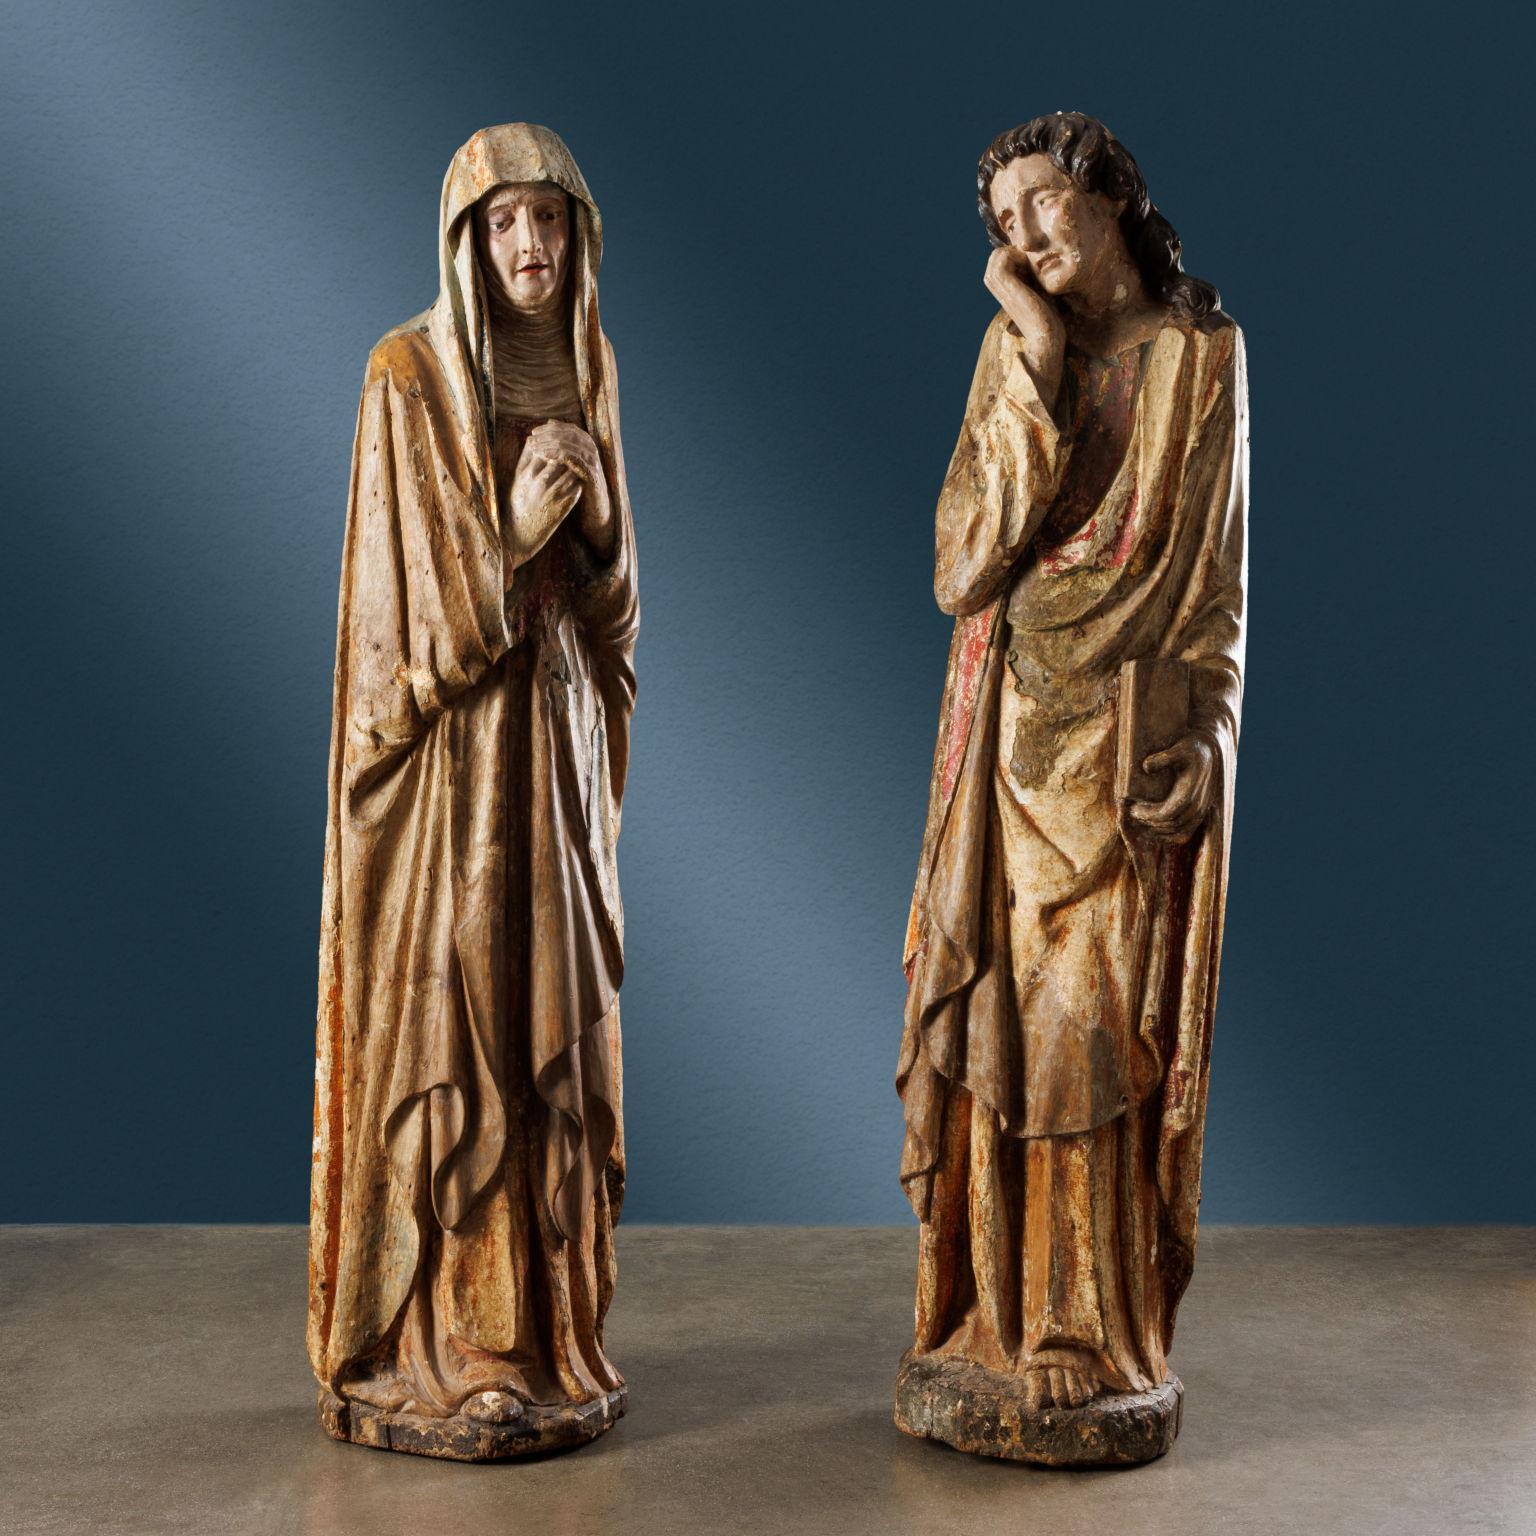 Pair of sculptures depicting the Virgin and St. John the Evangelist, portrayed in a mournful attitude. The former has a pained expression on her face, her hands clasped in front of her chest. She wears a long tunic topped with a mantle that also